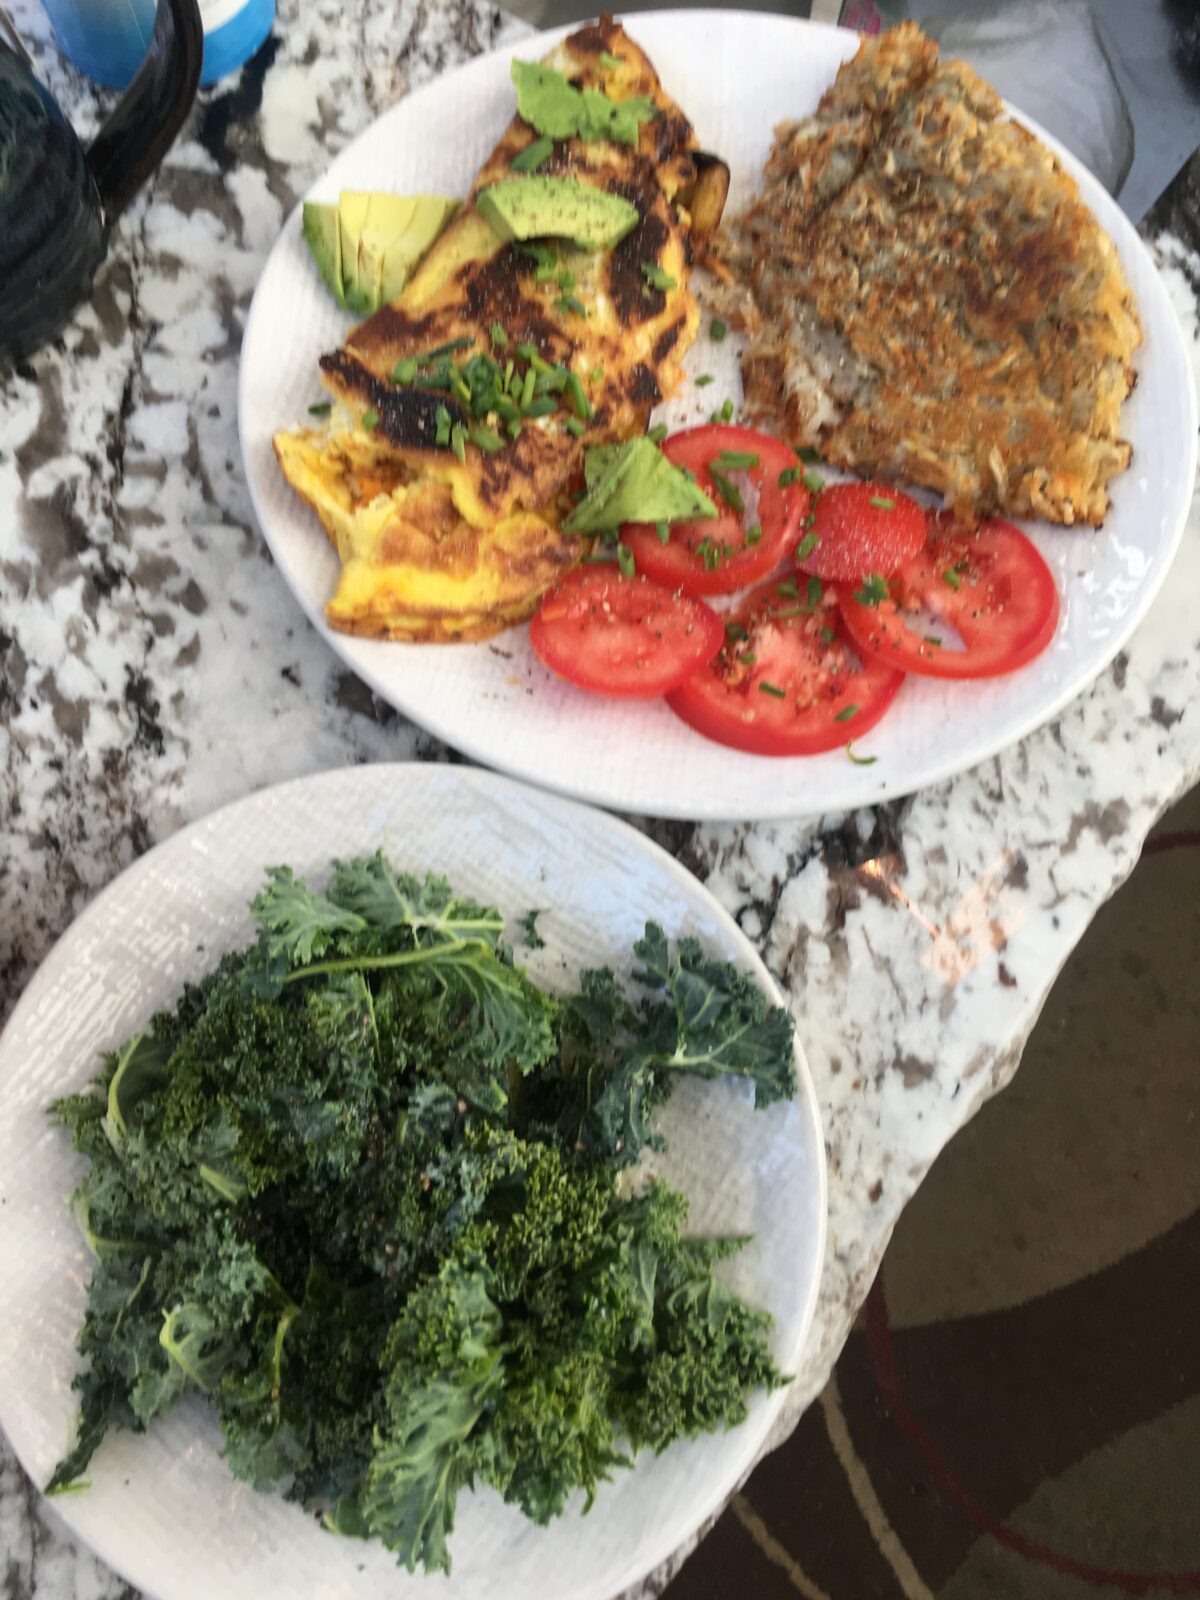 Veggie Omelet, Tomatoes, and Kale